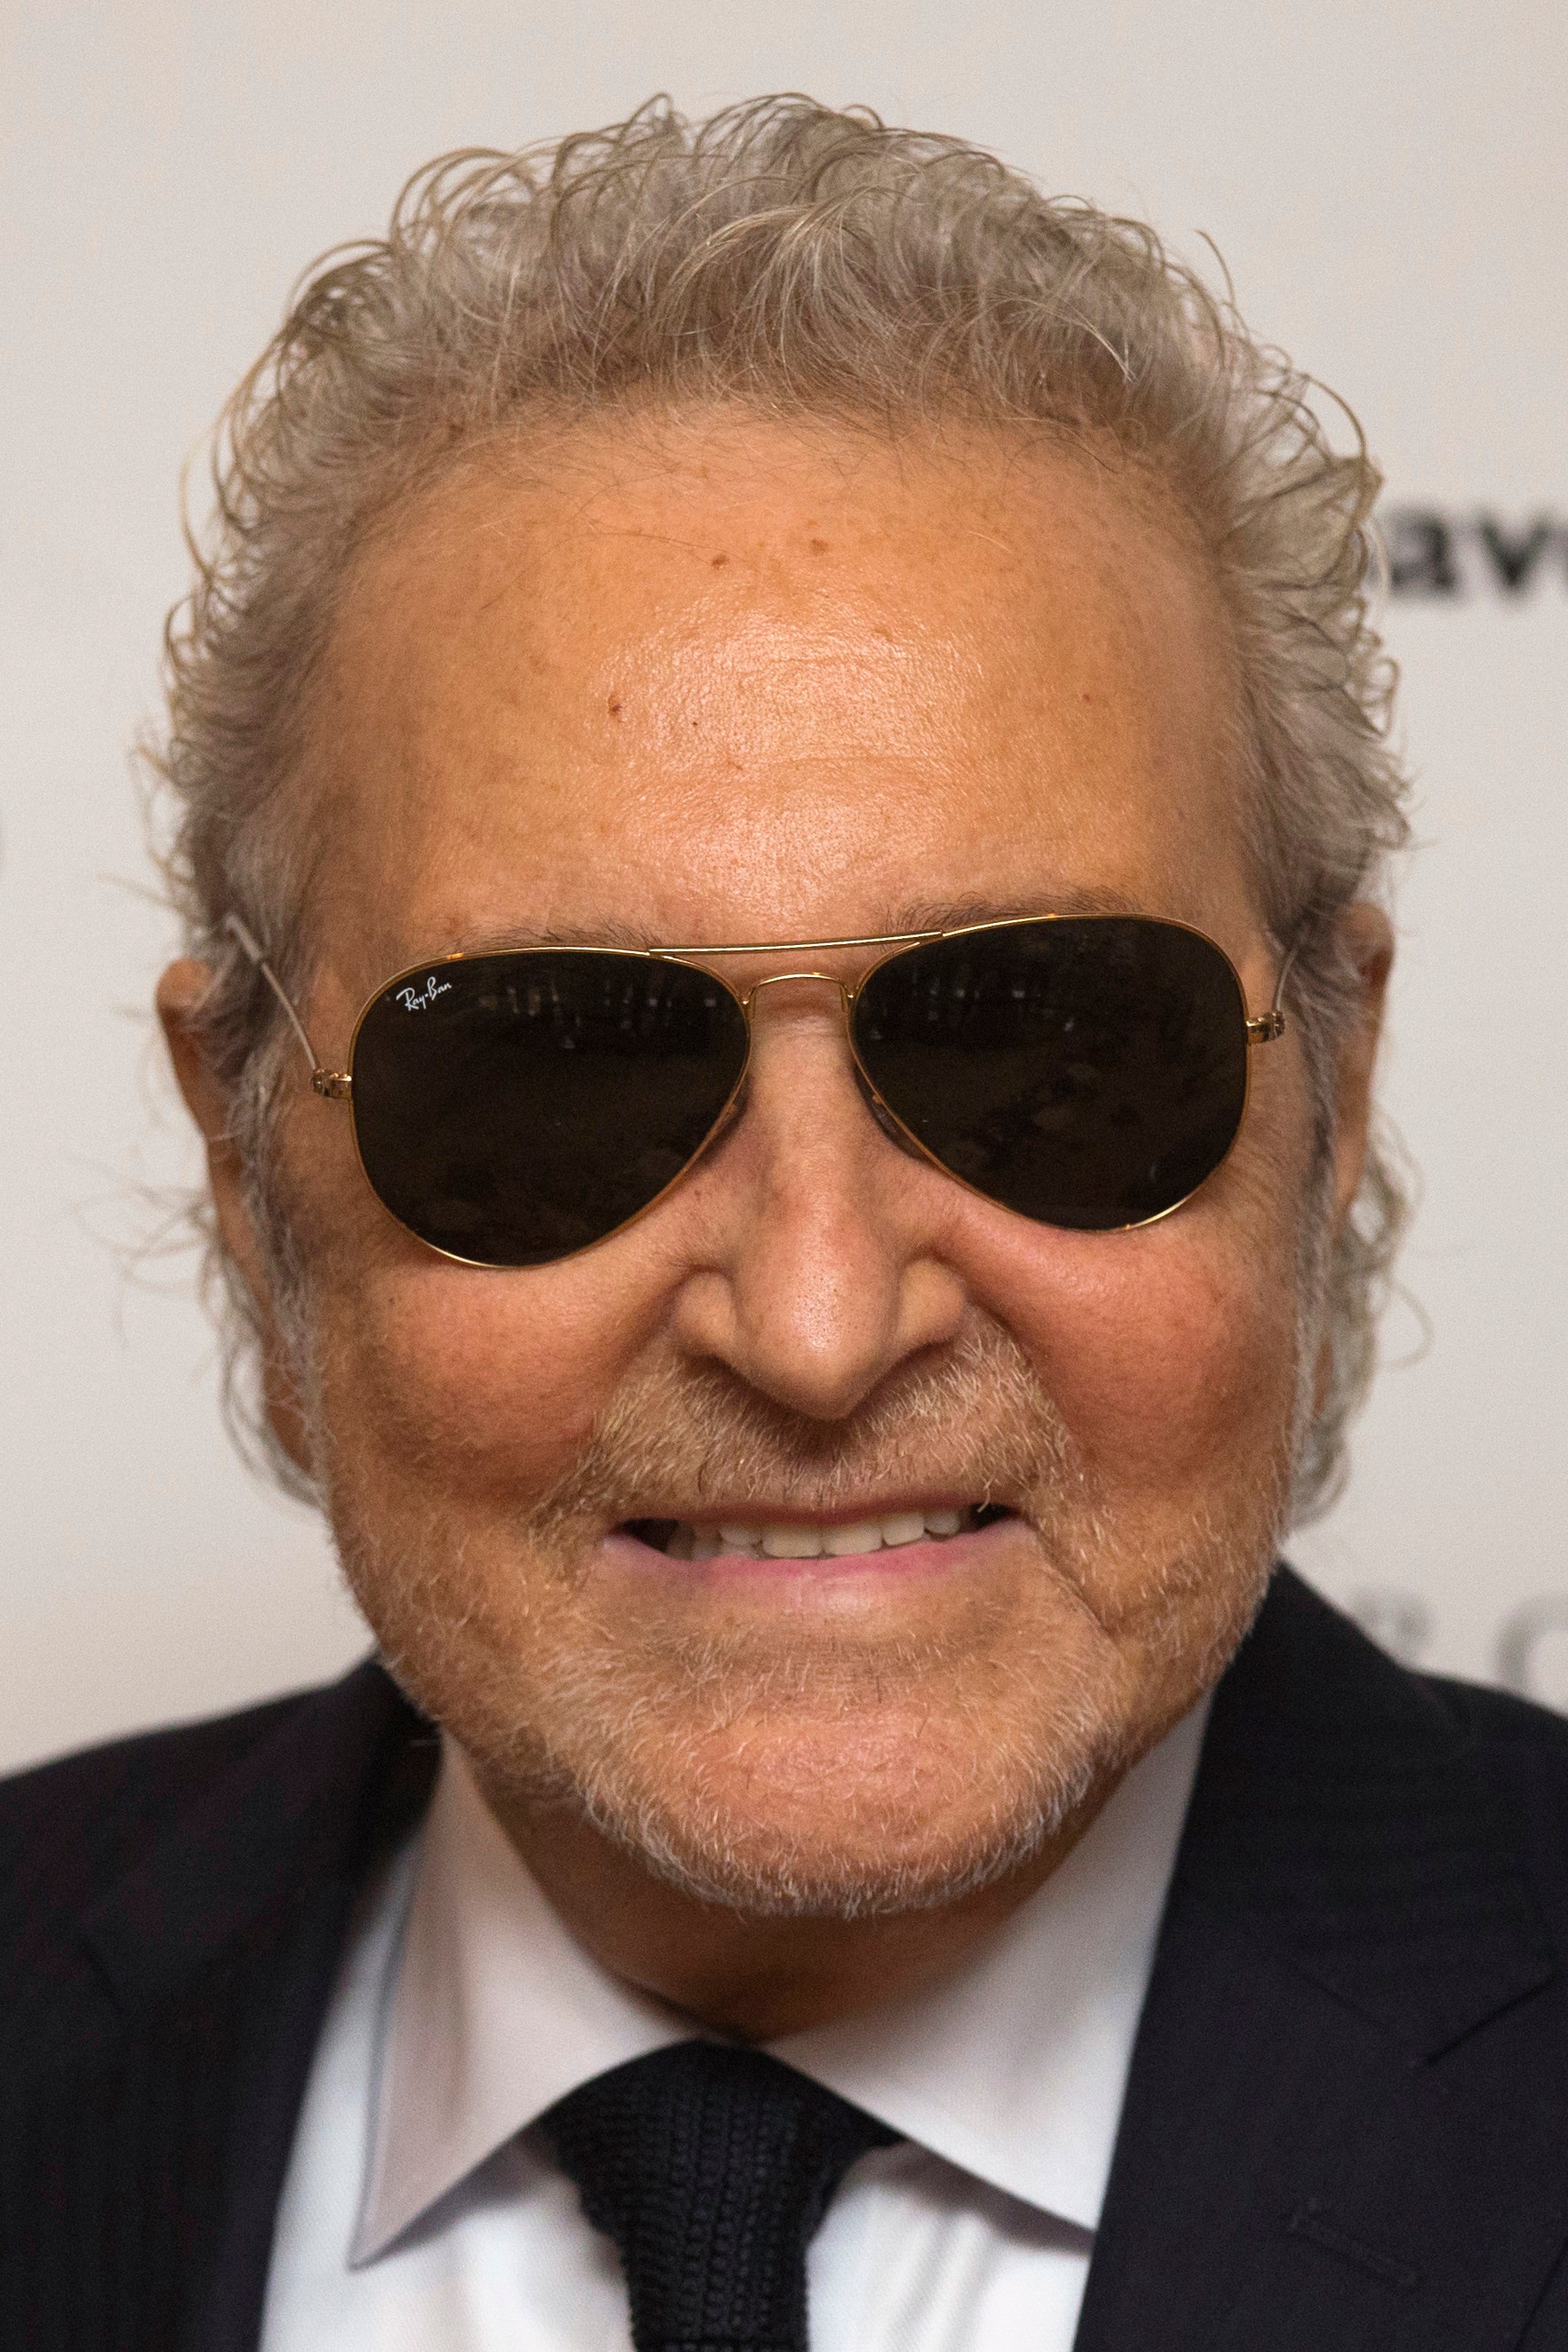 13 Intriguing Facts About Vince Camuto 